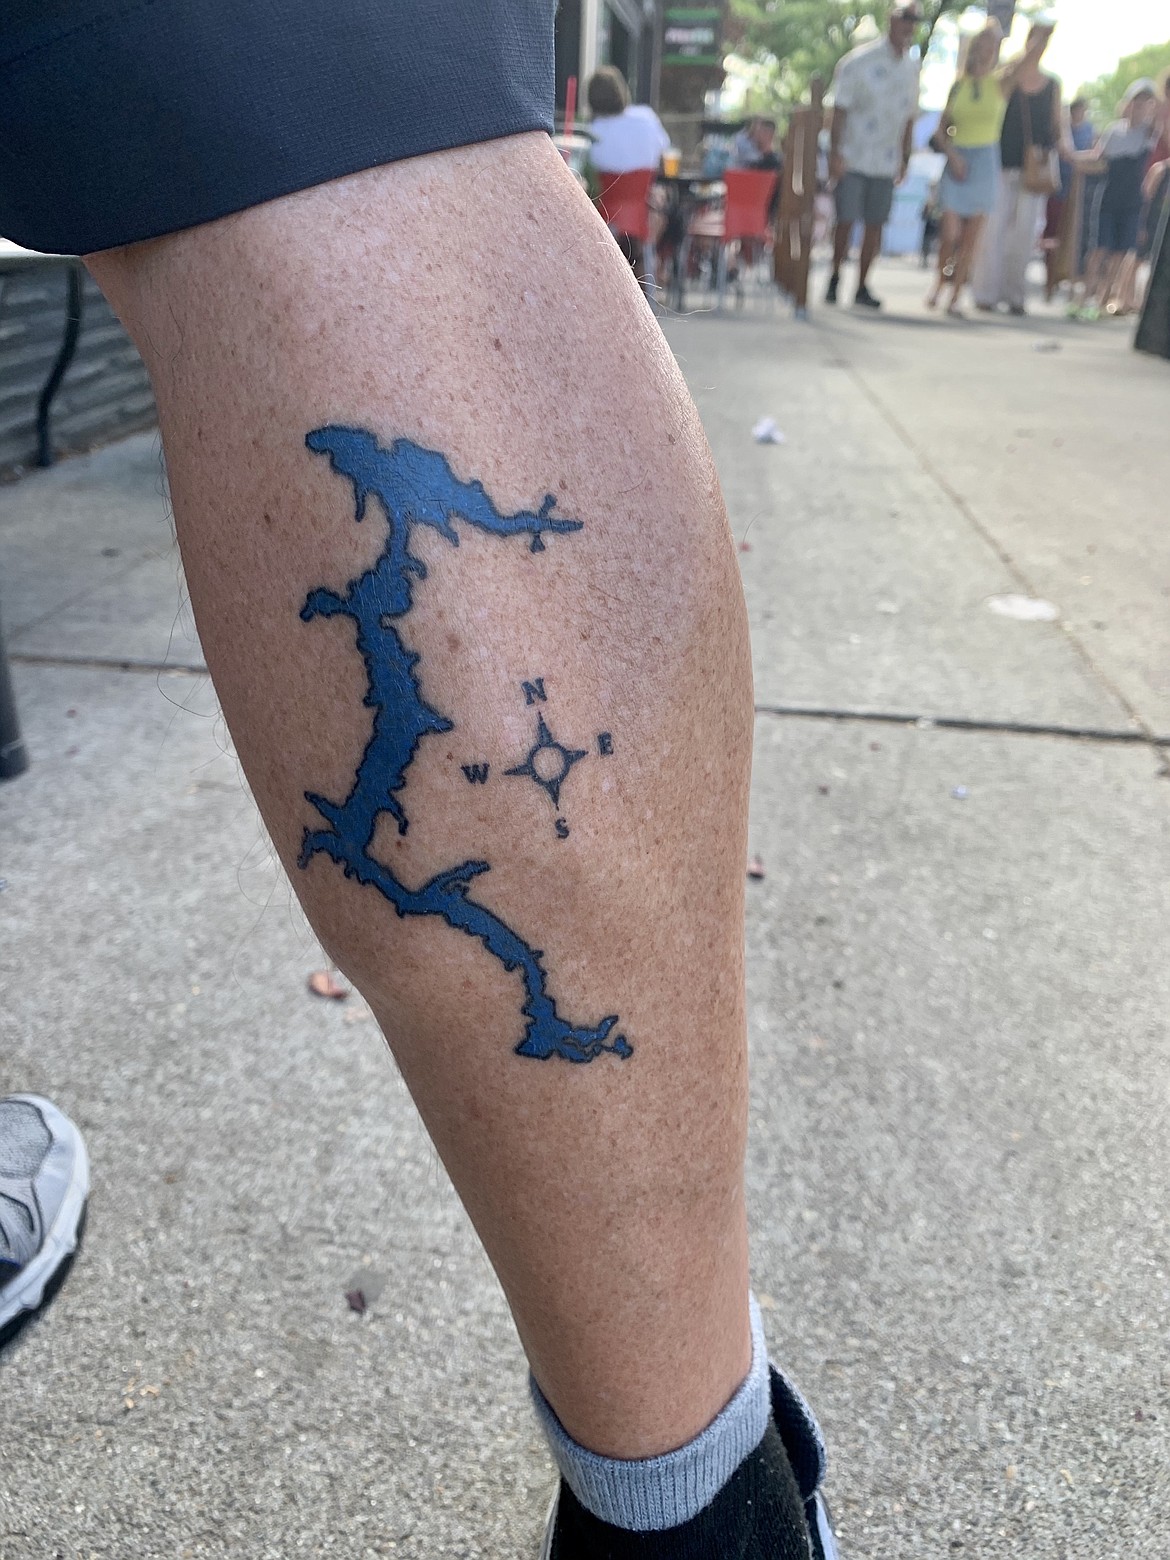 Captain Corky Meyer shows off his new tattoo of Lake Coeur d'Alene. Work done by tattoo artist, Christmas, at Artful Dodger Tattoo, 632 W. Appleway Ave. in Coeur d'Alene.